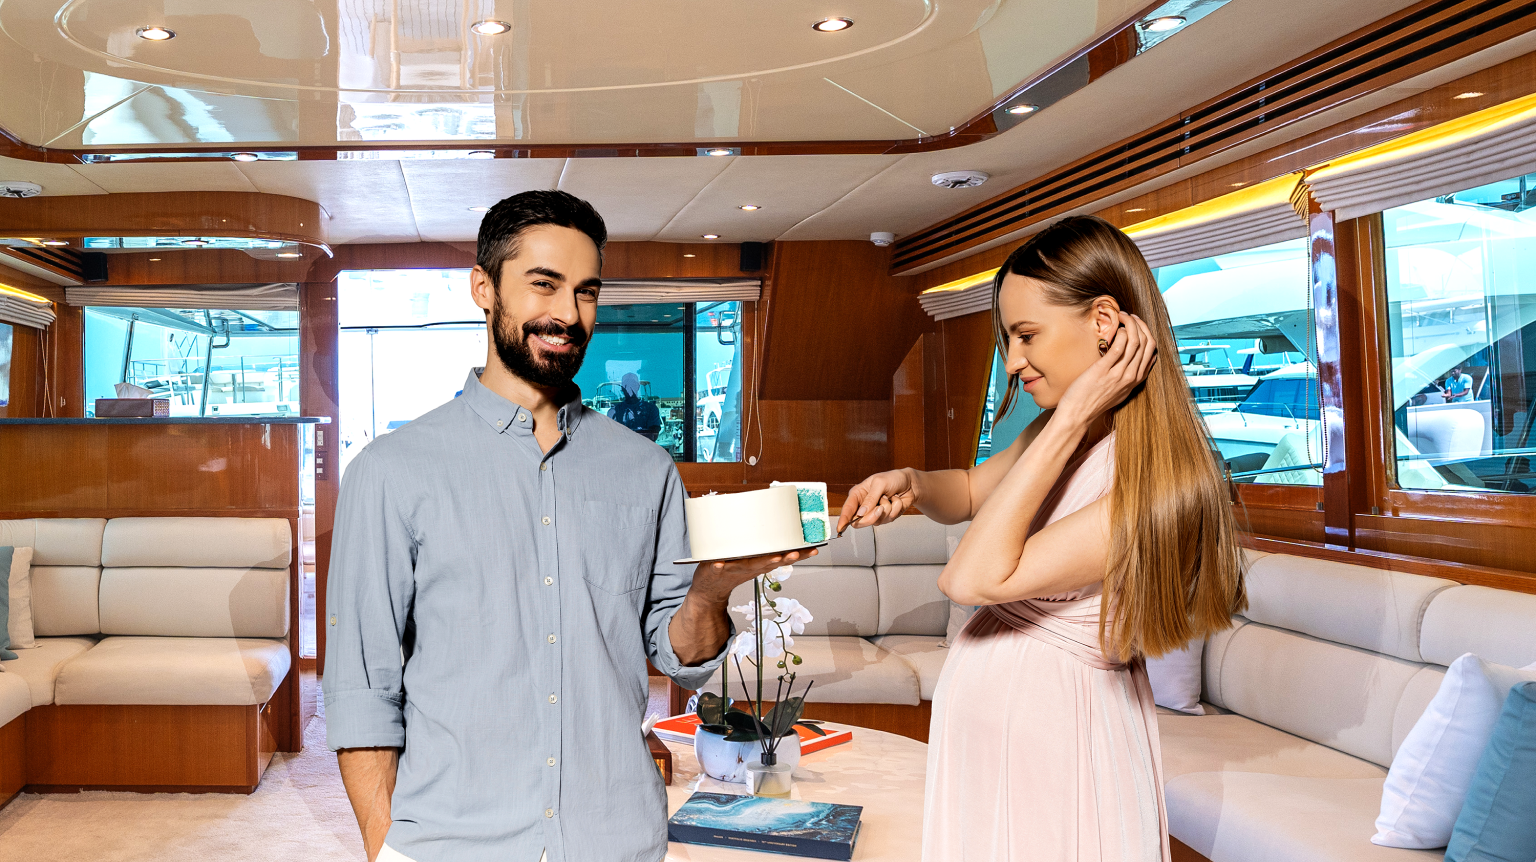 Baby Shower/Gender Reveal Party on Private Luxury Yachts